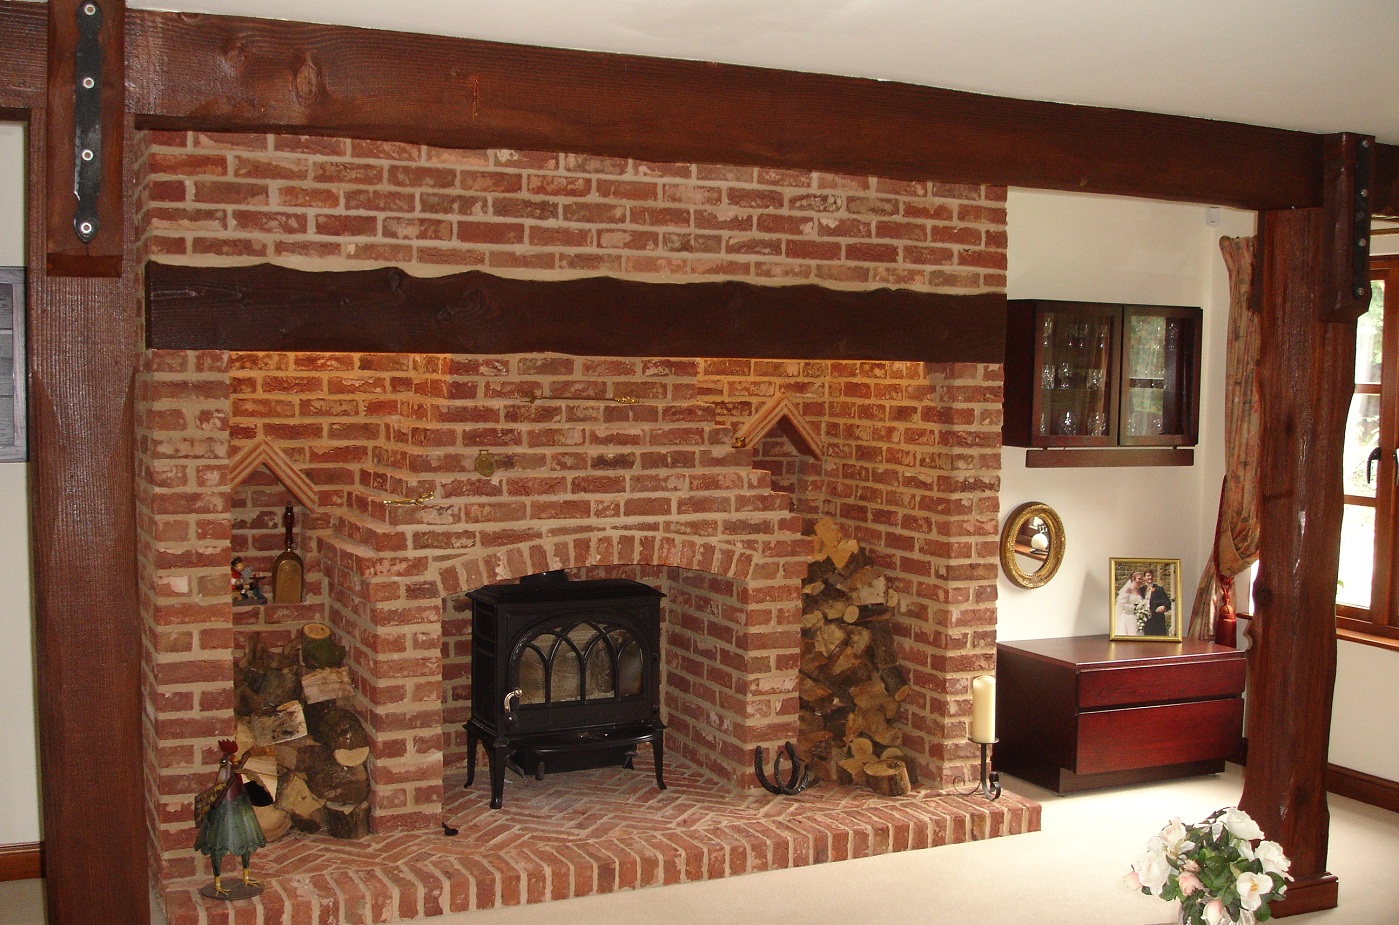 Nothing has the appeal of brick when it comes to fireplaces